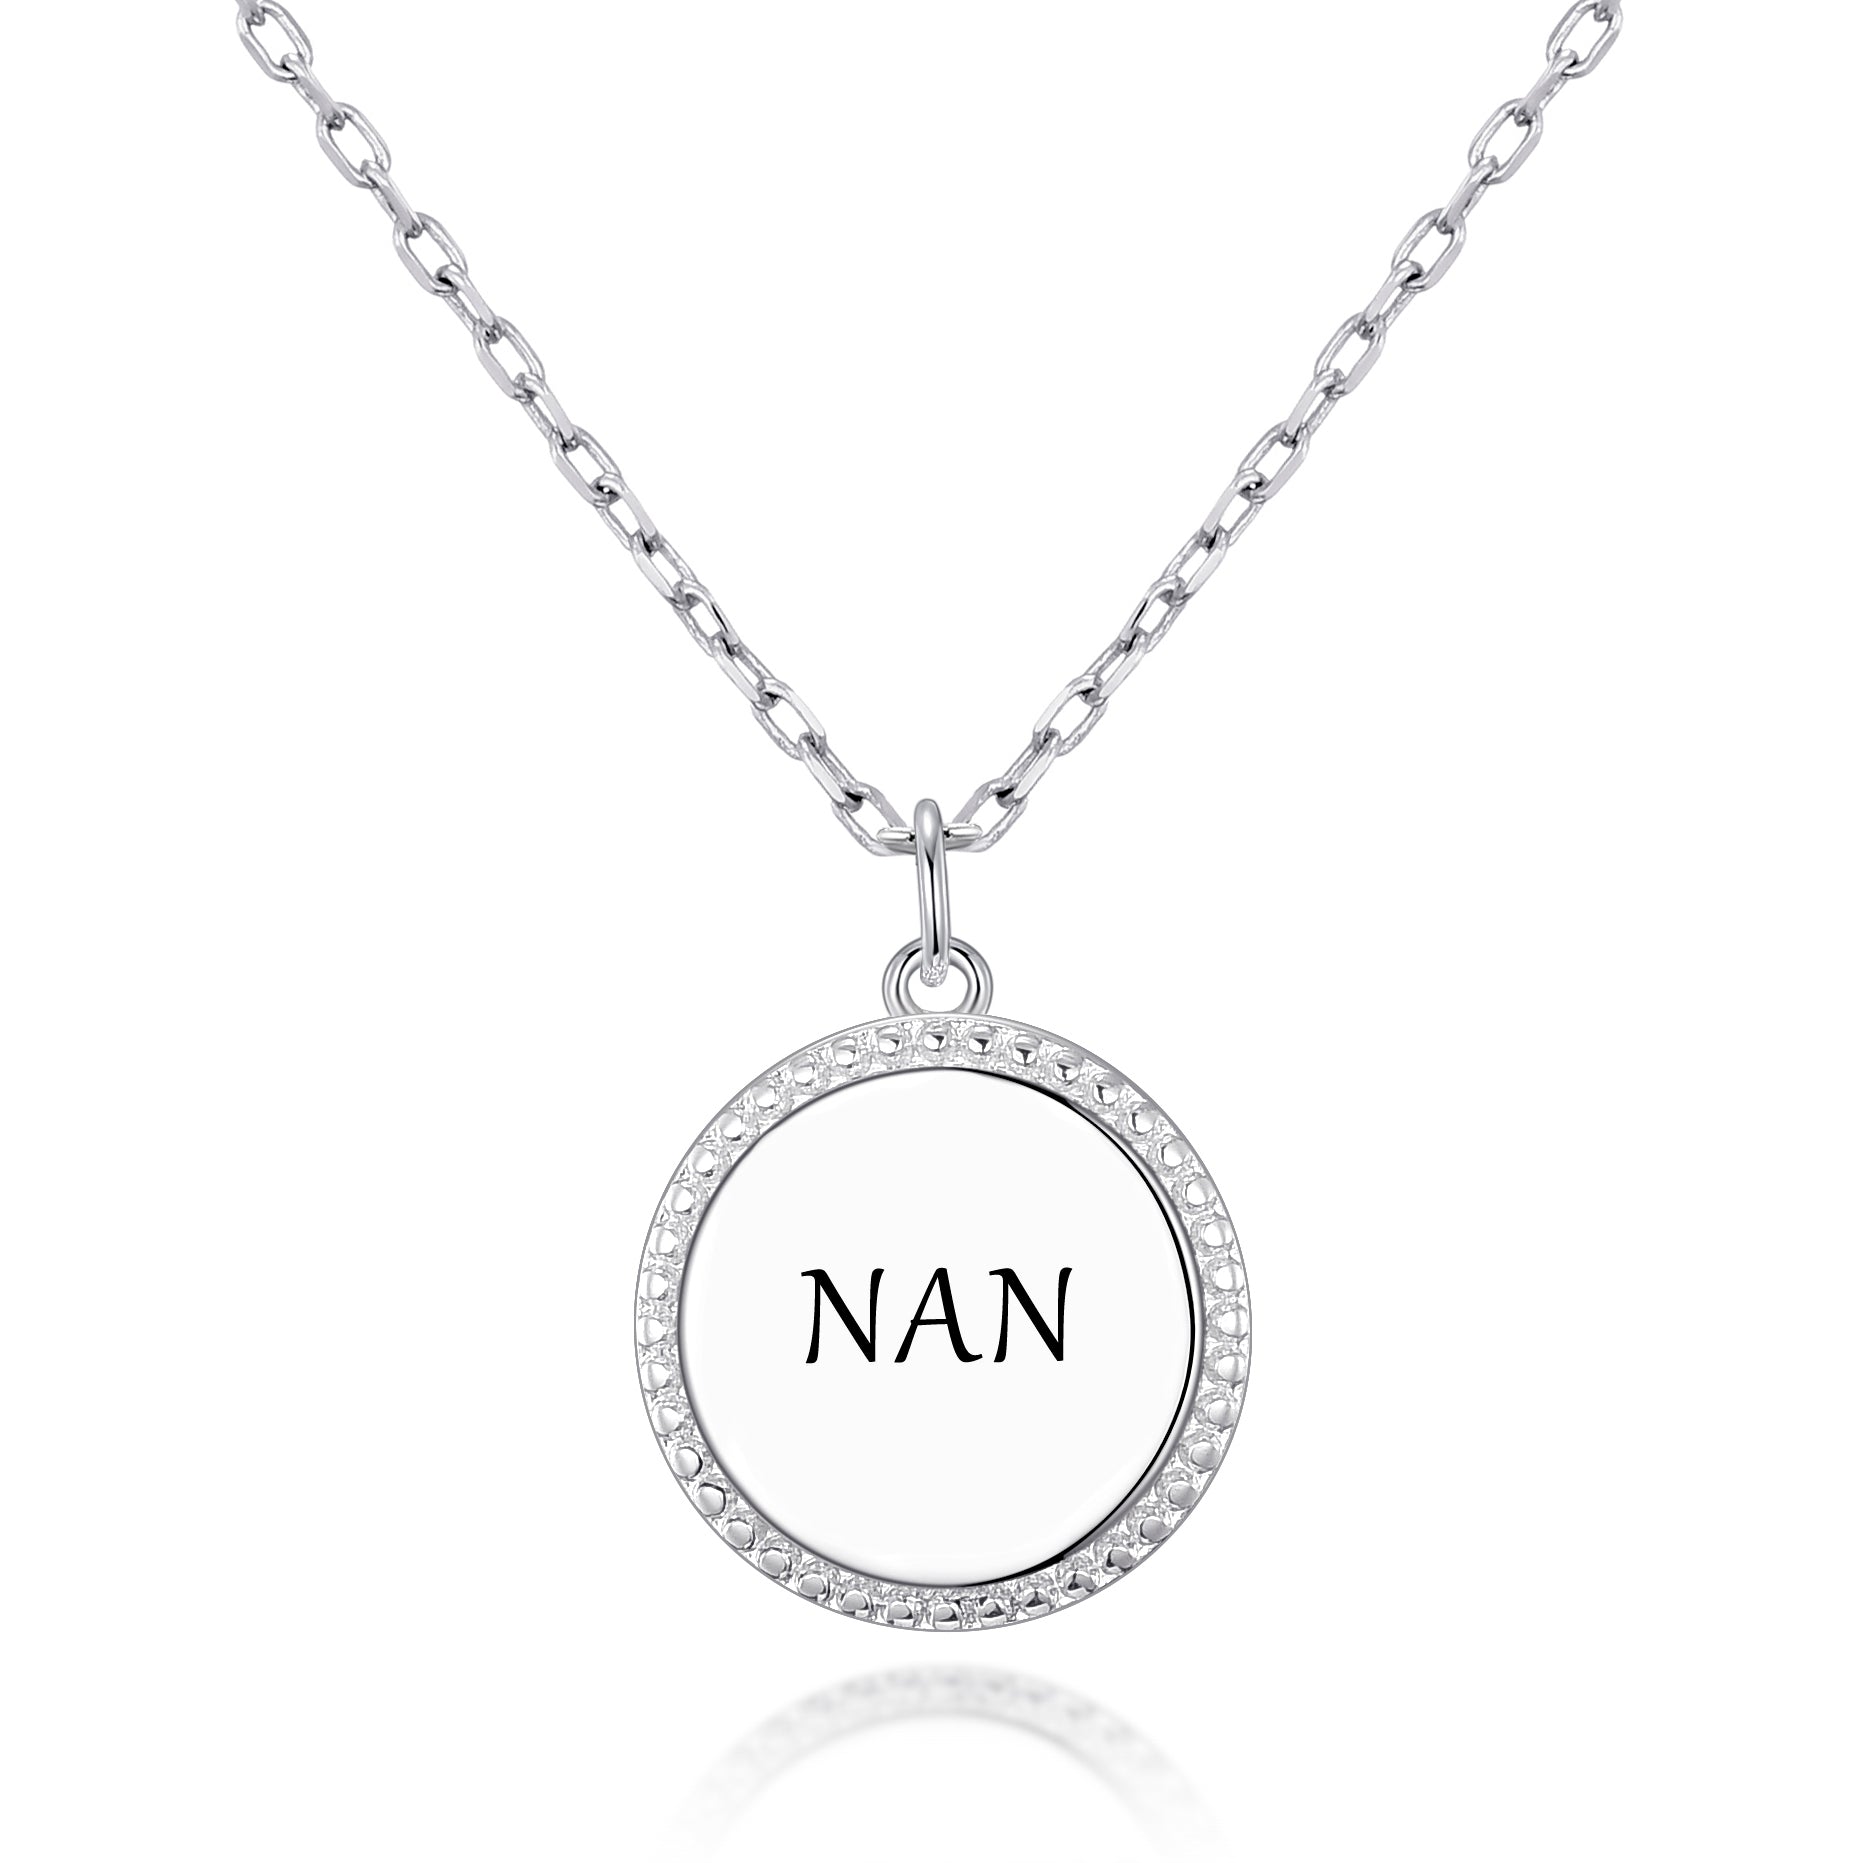 Silver Plated Filigree Disc Nan Necklace by Philip Jones Jewellery